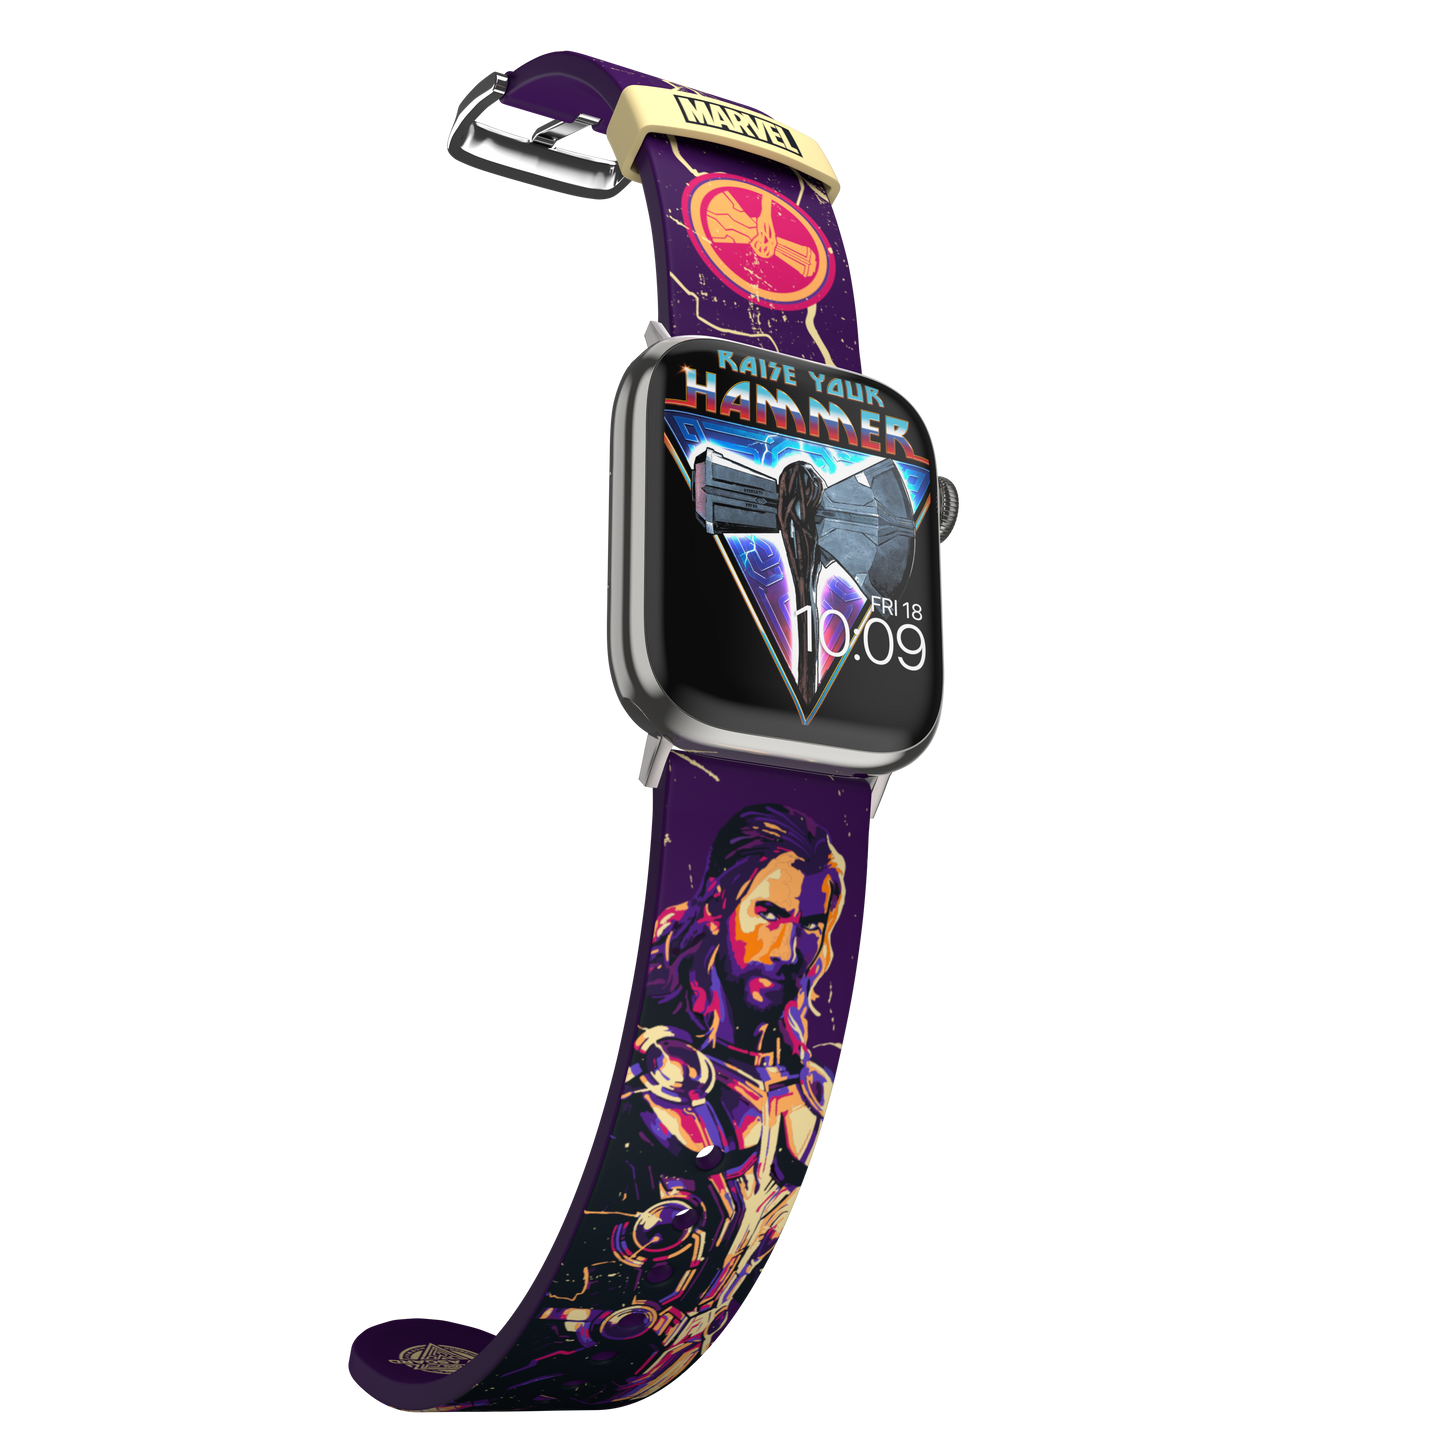 MARVEL - Thor Smartwatch Band by MobyFox